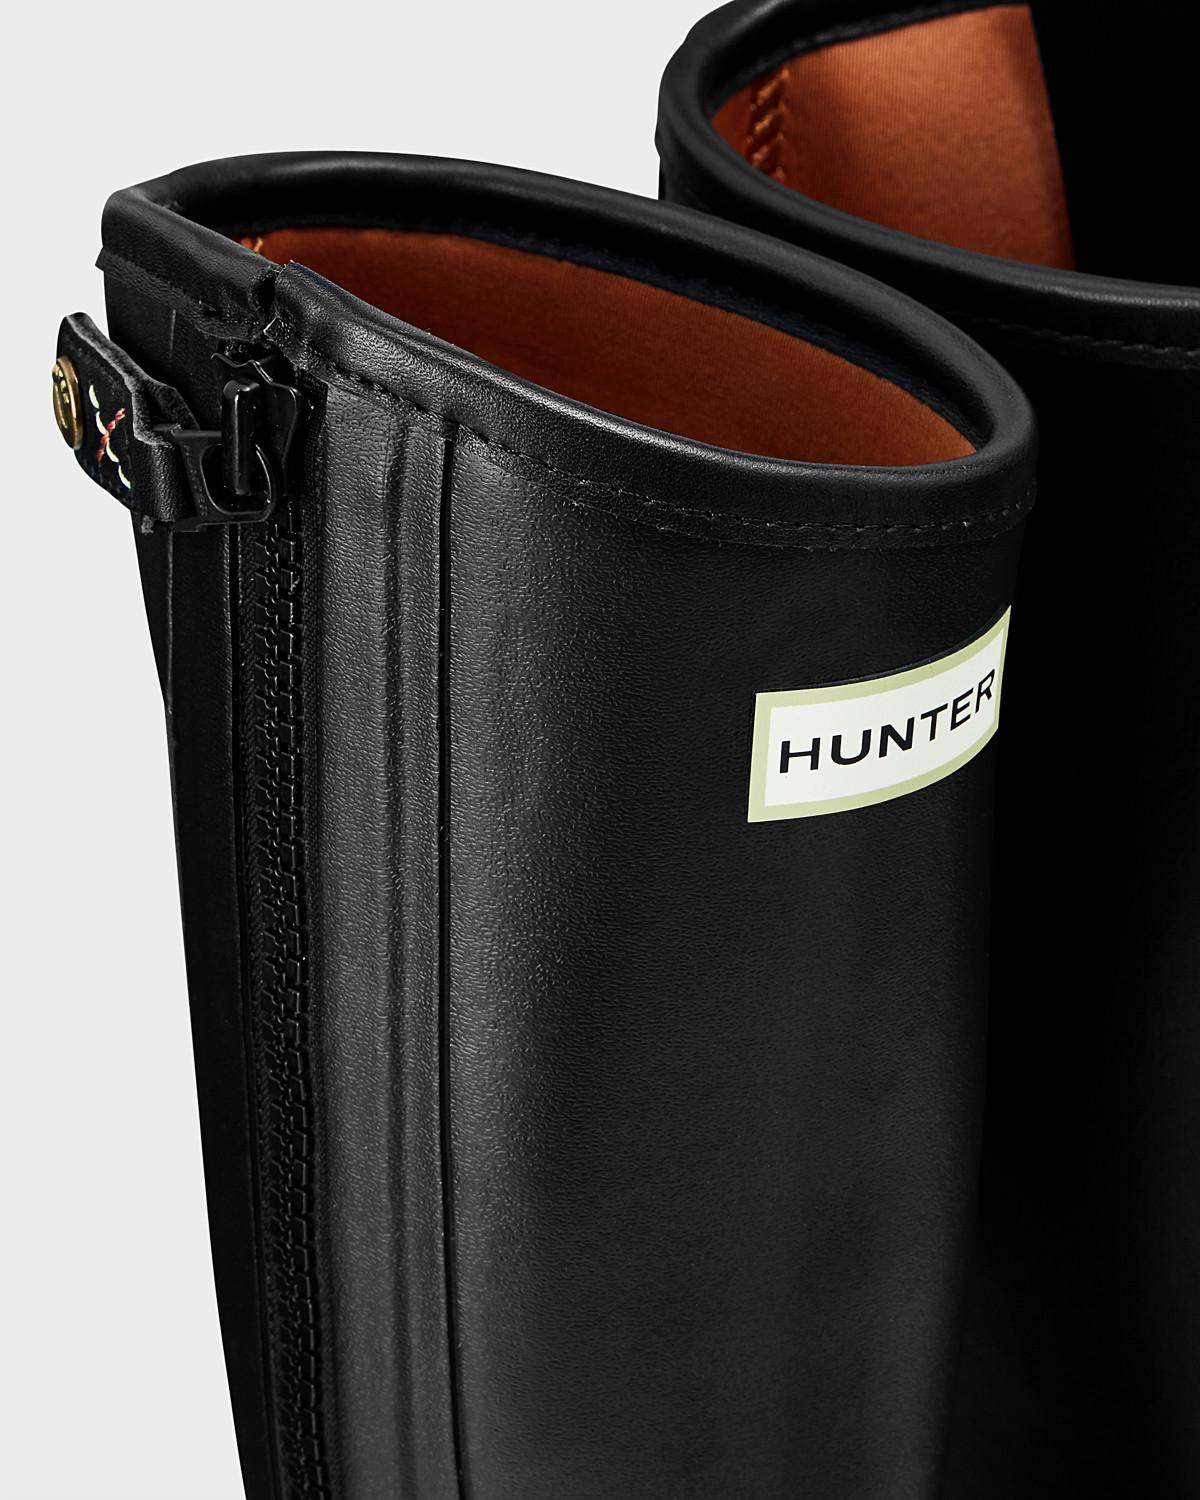 hunter wellesley rubber riding boot